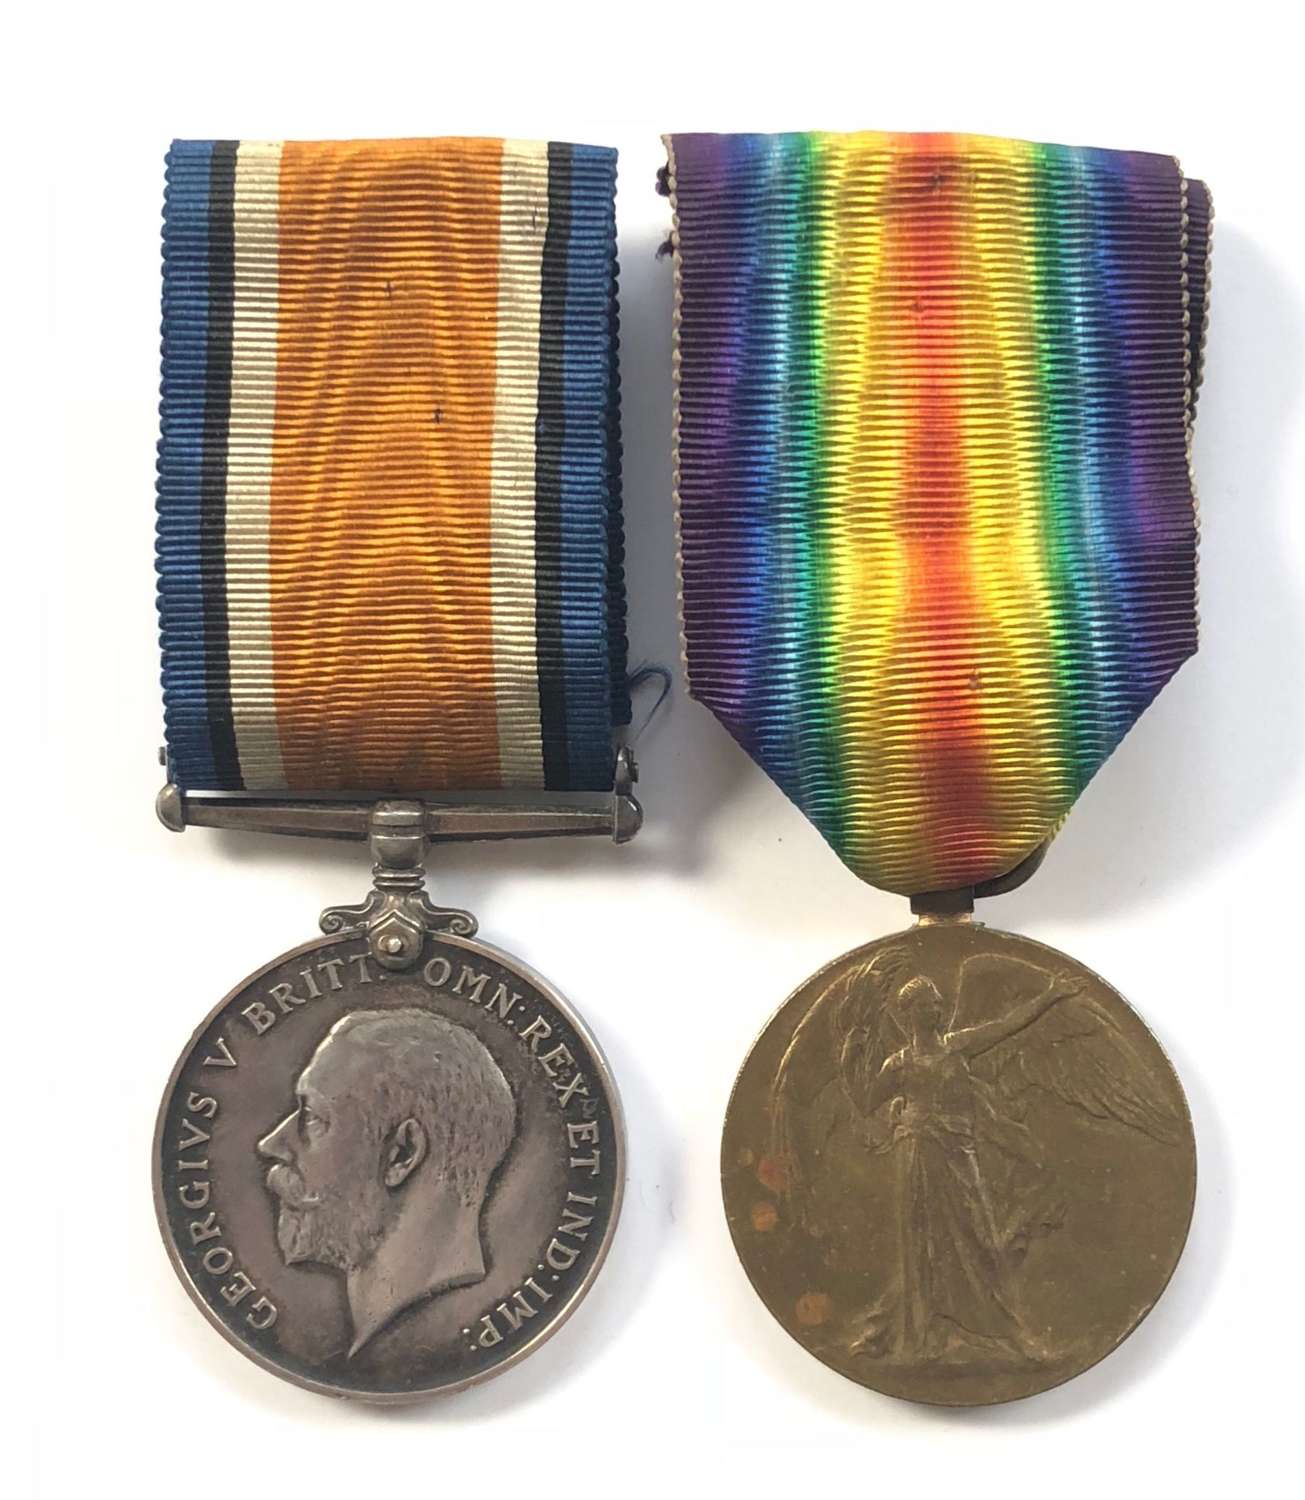 WW1 Monmouthshire Regiment Medal Pair.